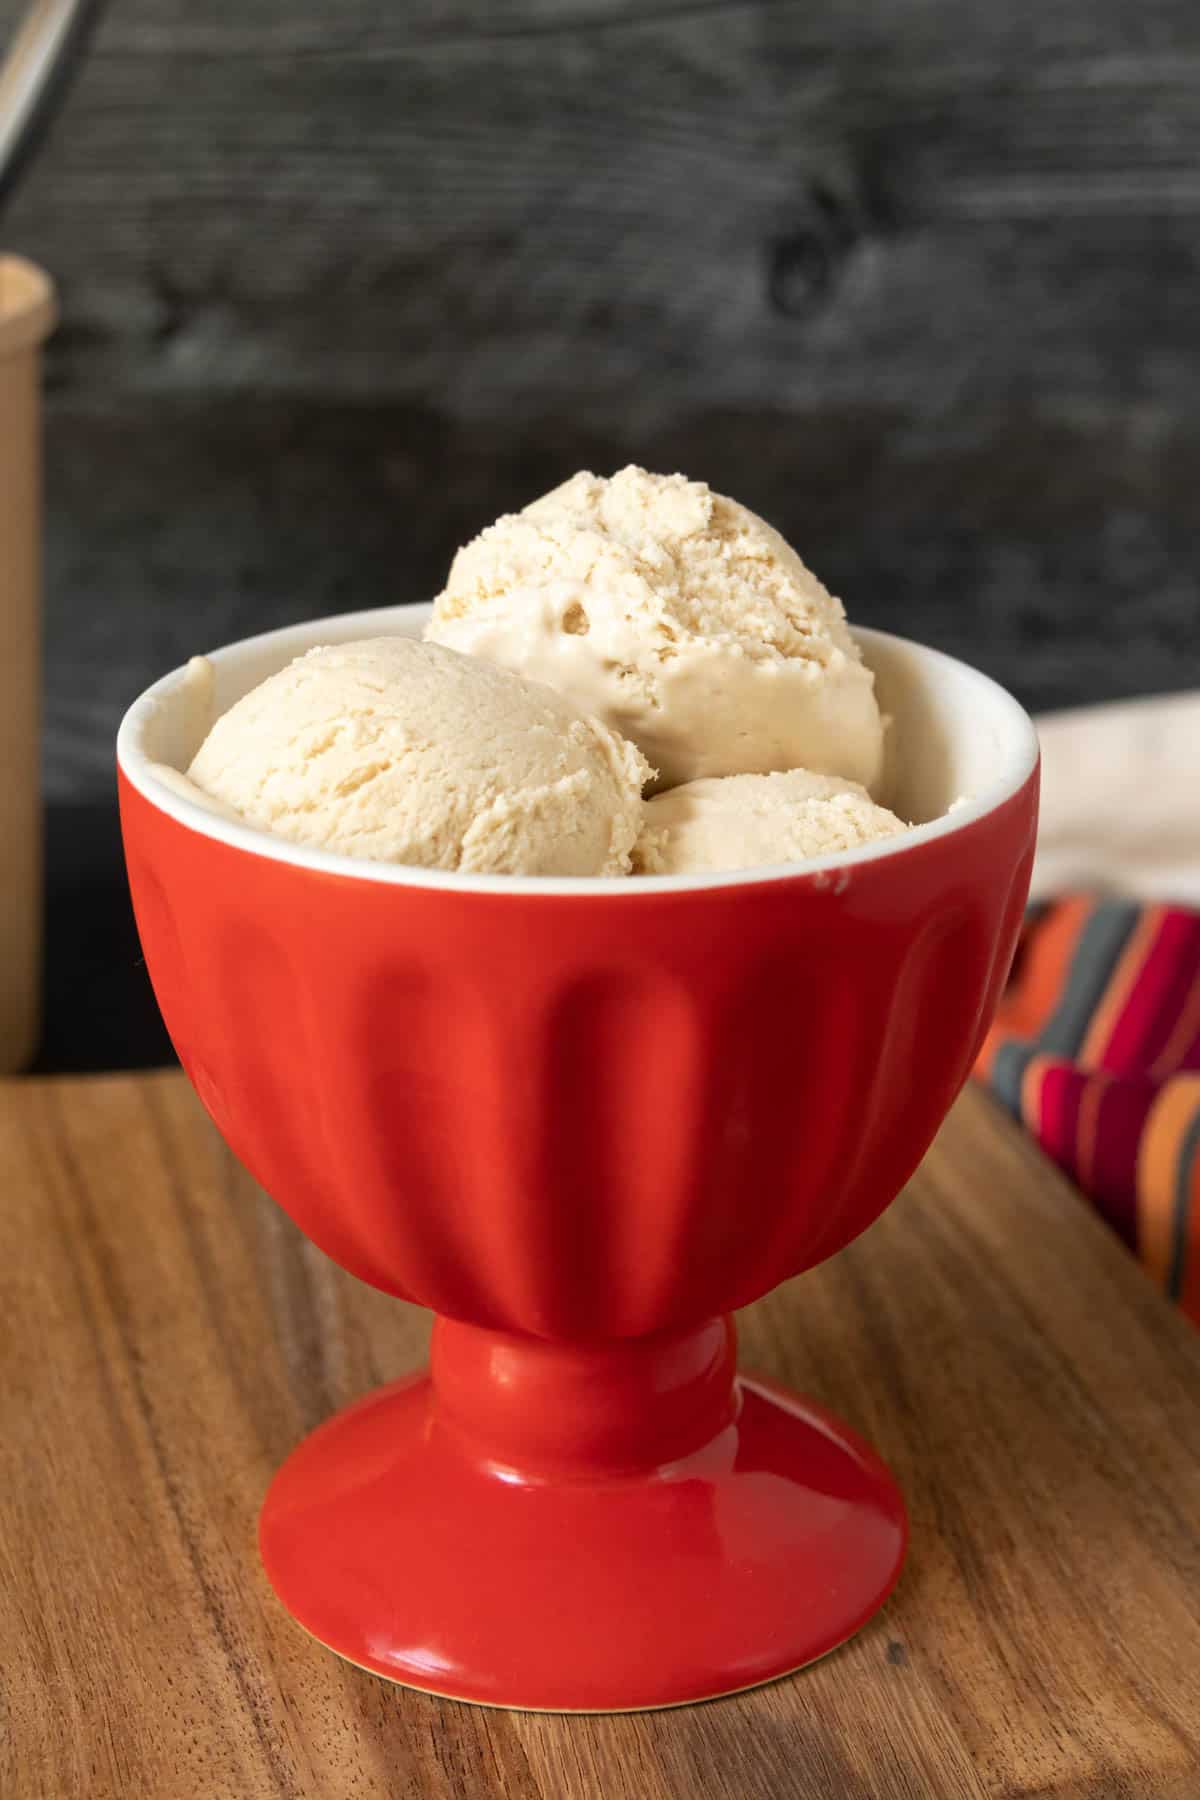 Red bowl of no-churn ice cream with a black wooden background.